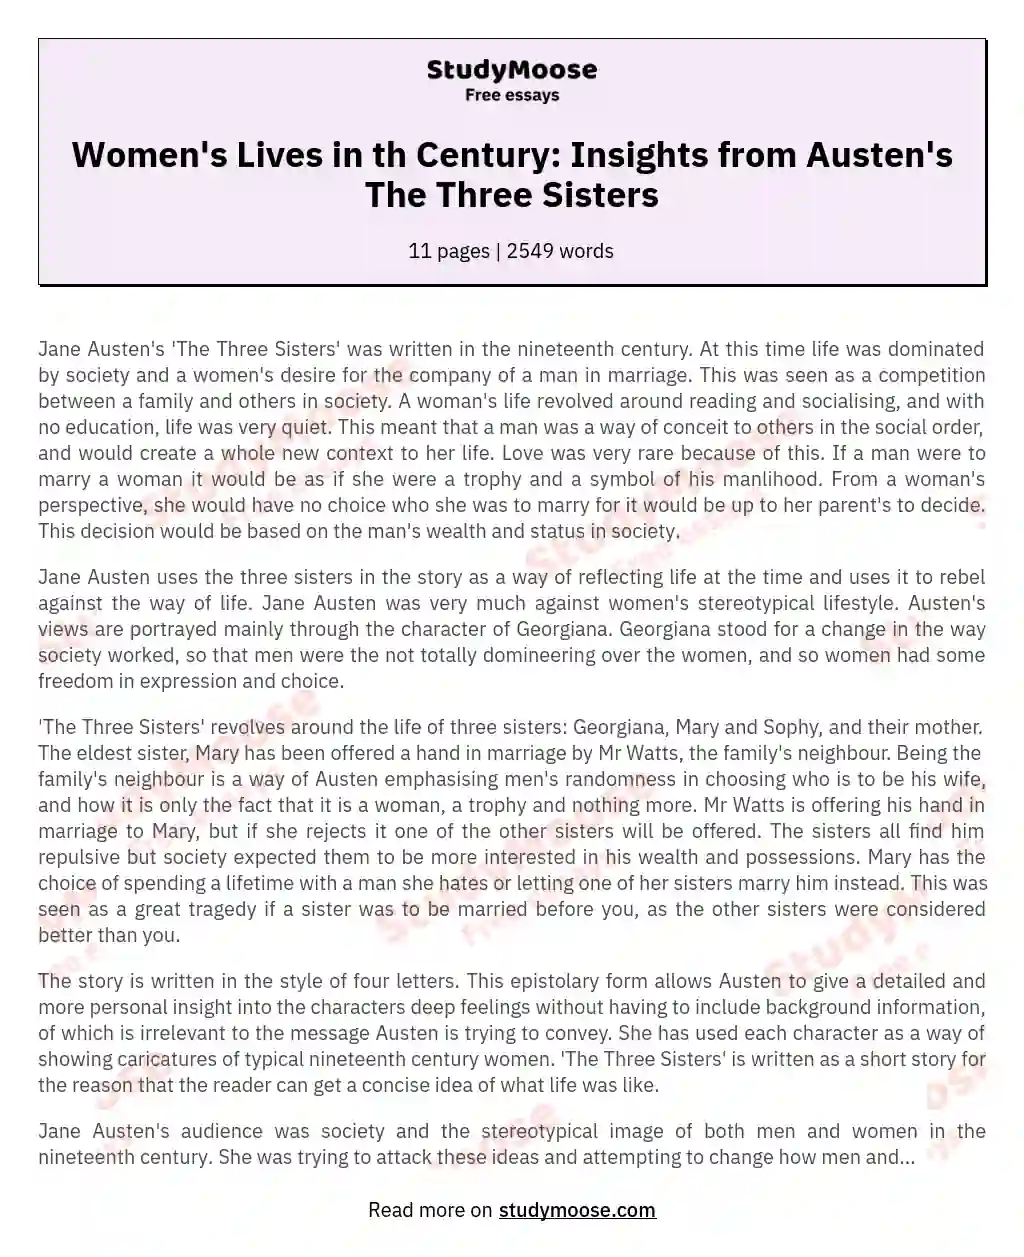 Women's Lives in th Century: Insights from Austen's The Three Sisters essay